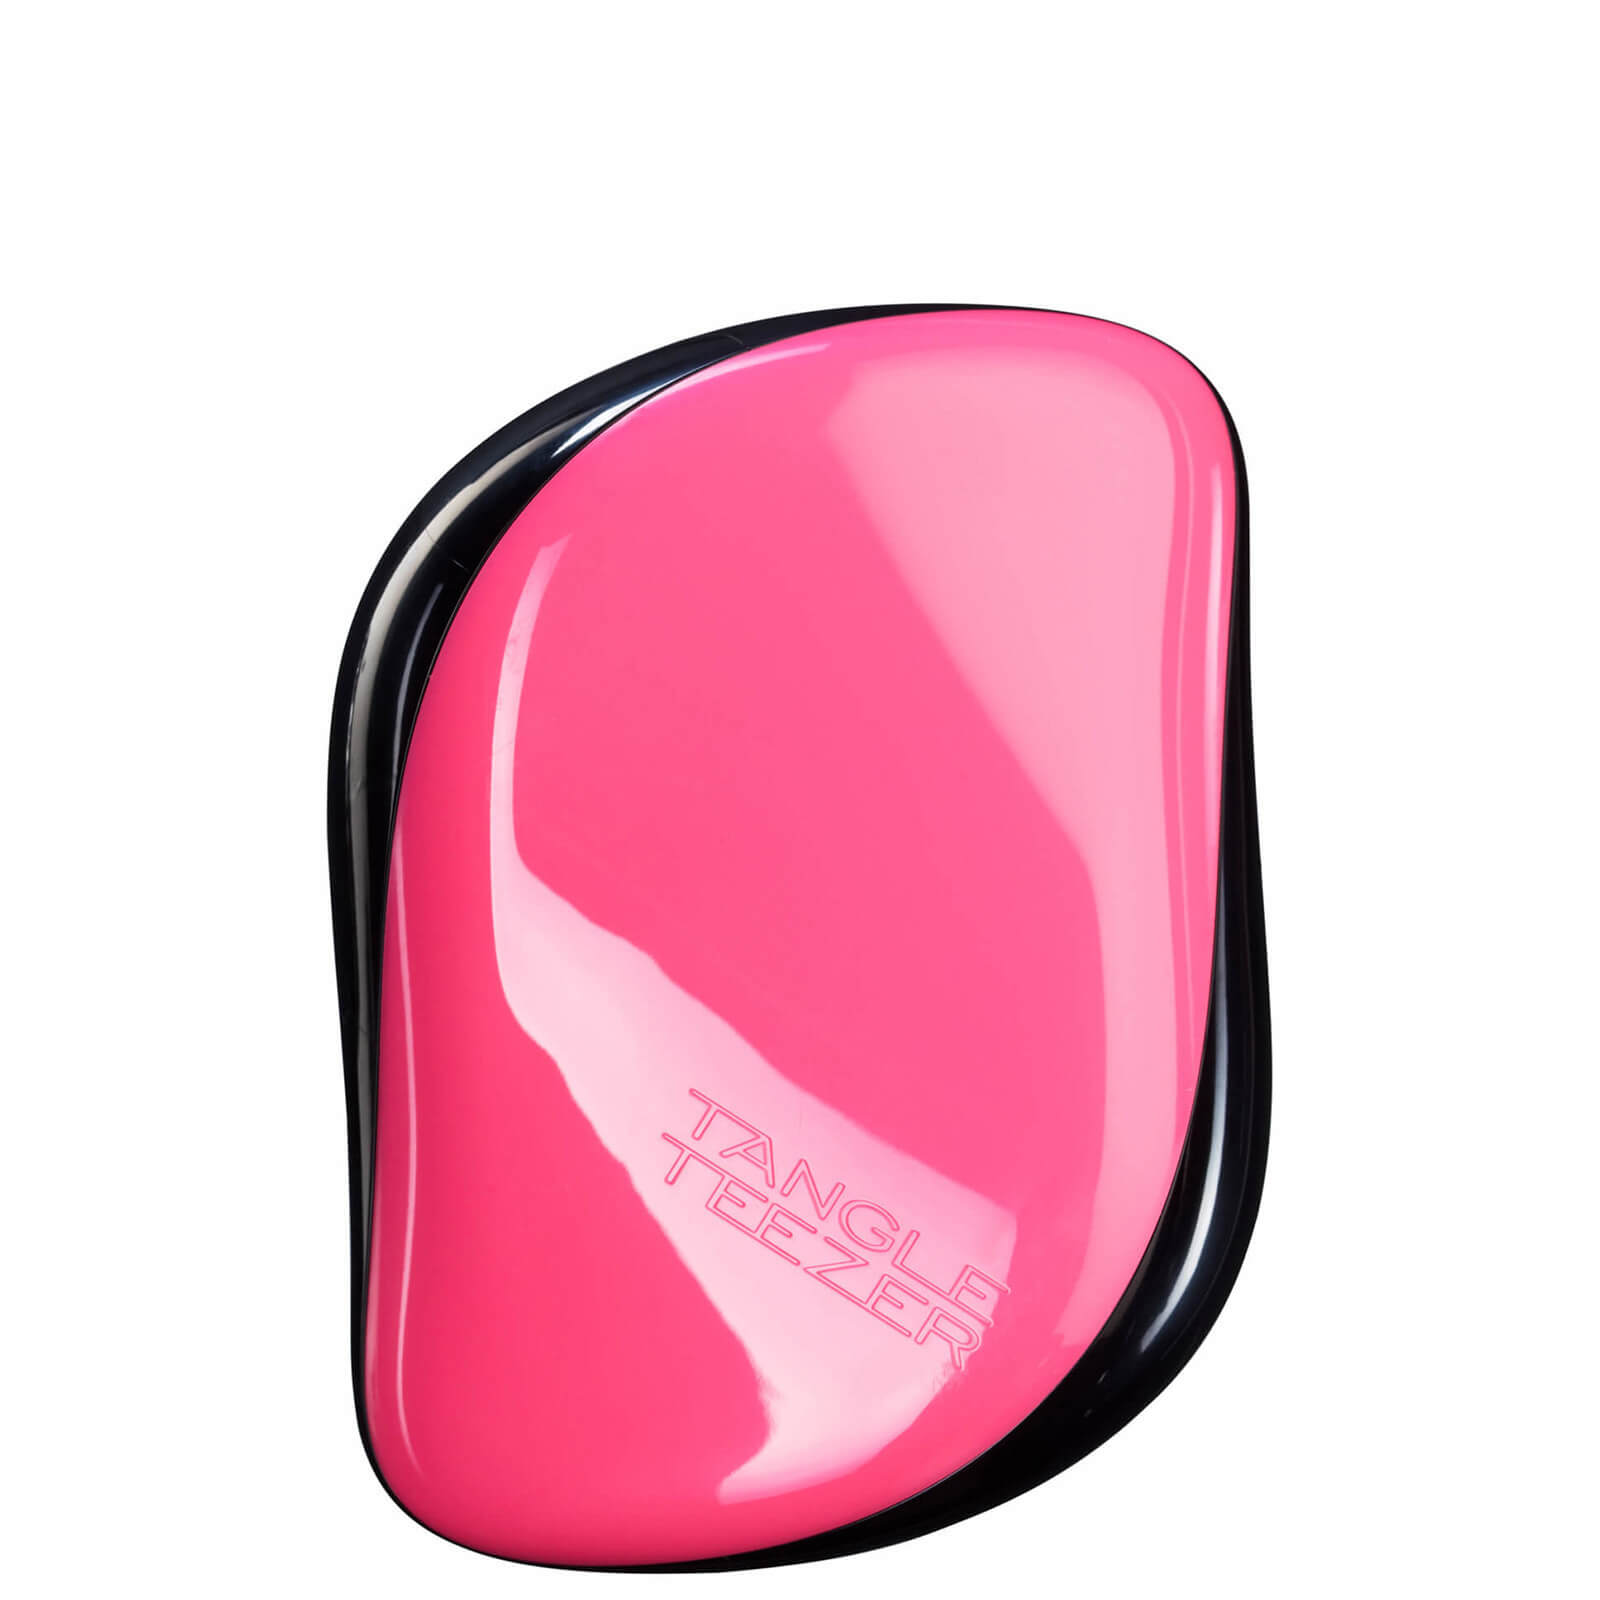 Look Fantastic coupon: Tangle Teezer Compact Styler Hairbrush - Pink Sizzle